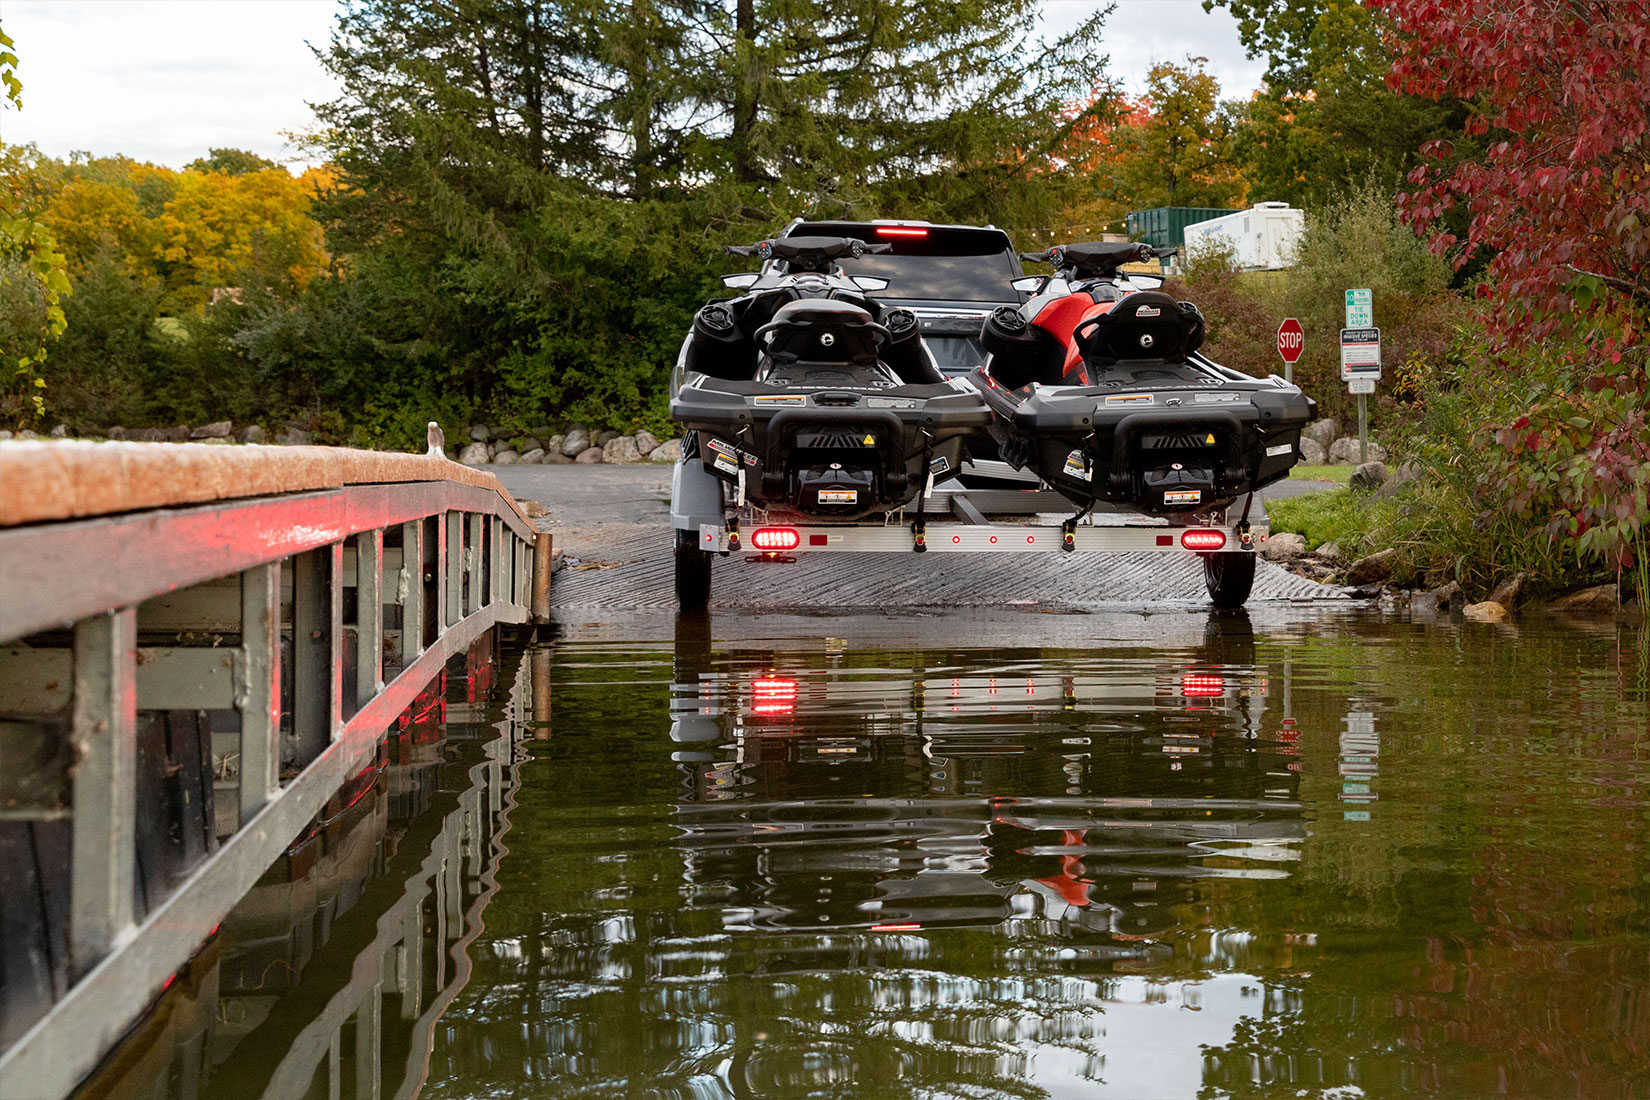 Triton aluminum PWC trailer with two jetskis backing into the water